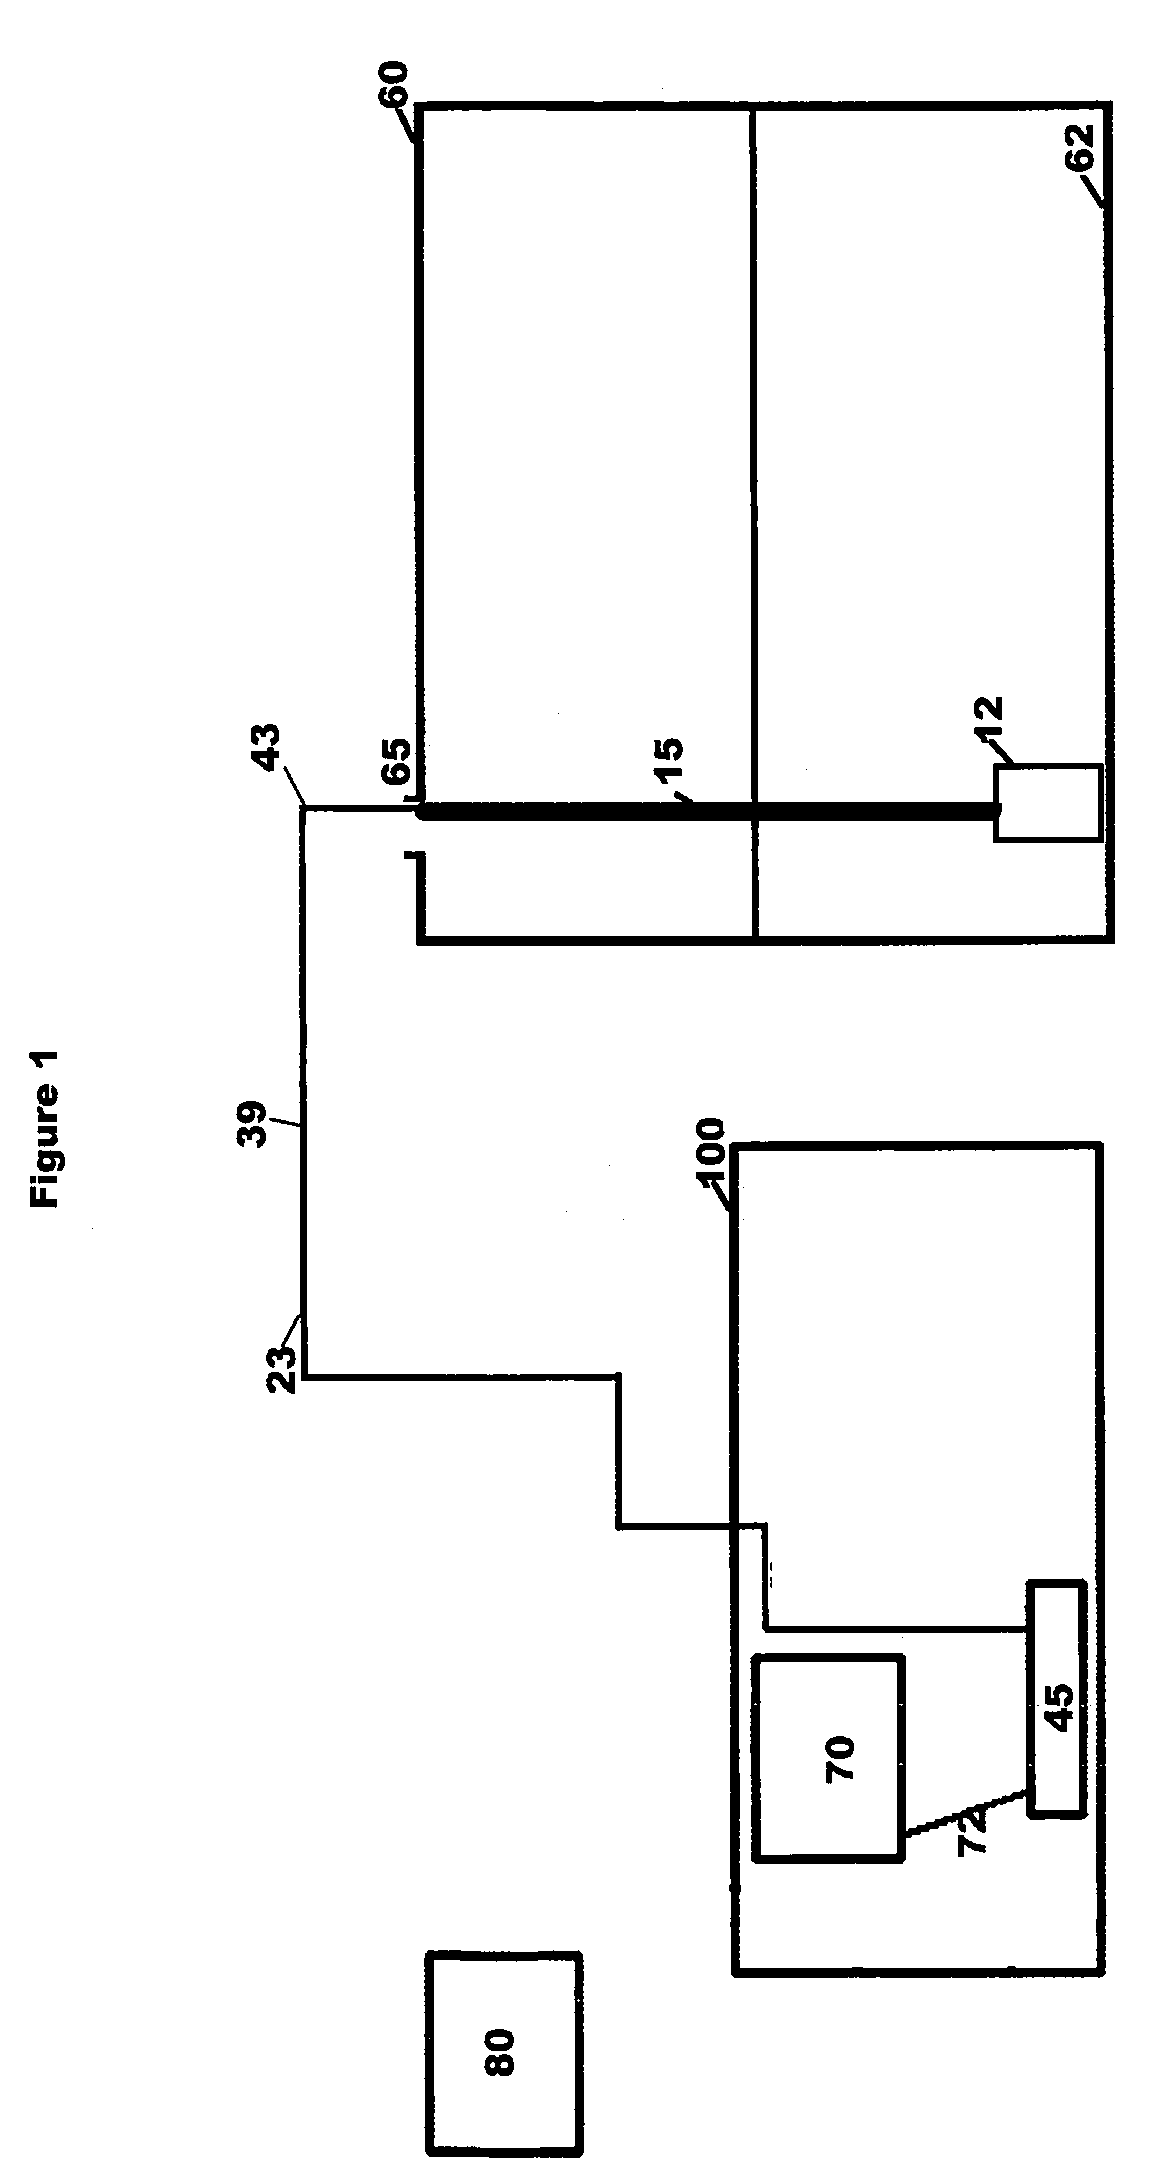 Method and apparatus for storage tank leak detection